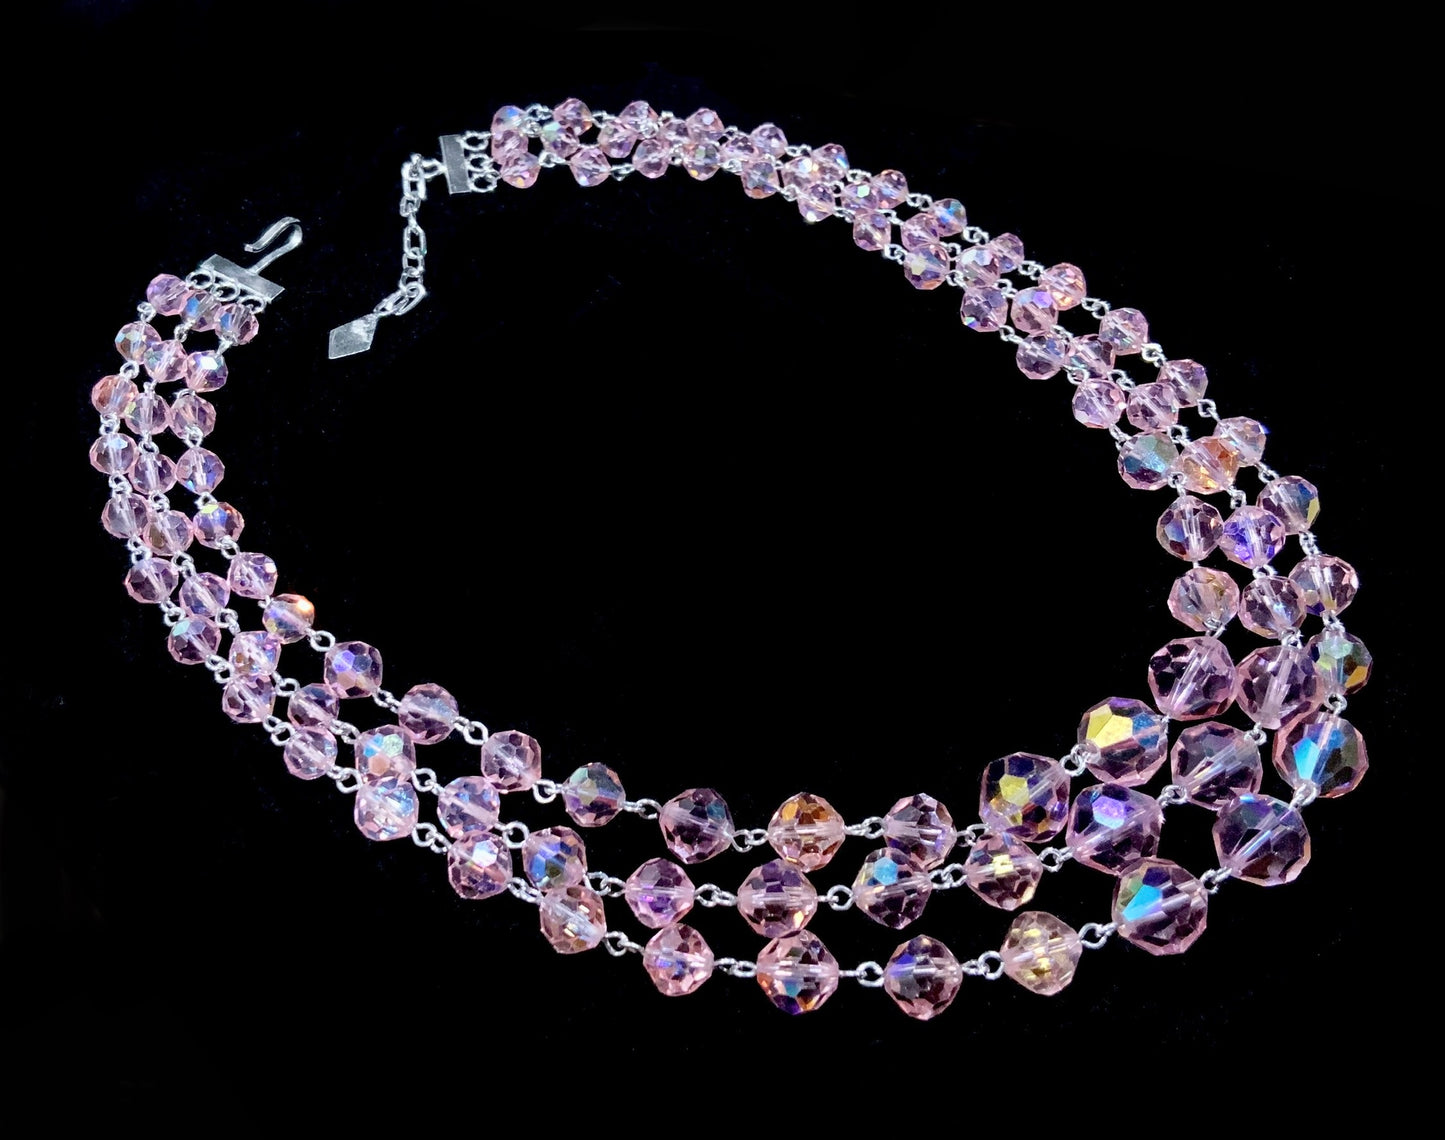 Pink AB Crystal Bead Necklace Silver Tone Triple Strand 1950s